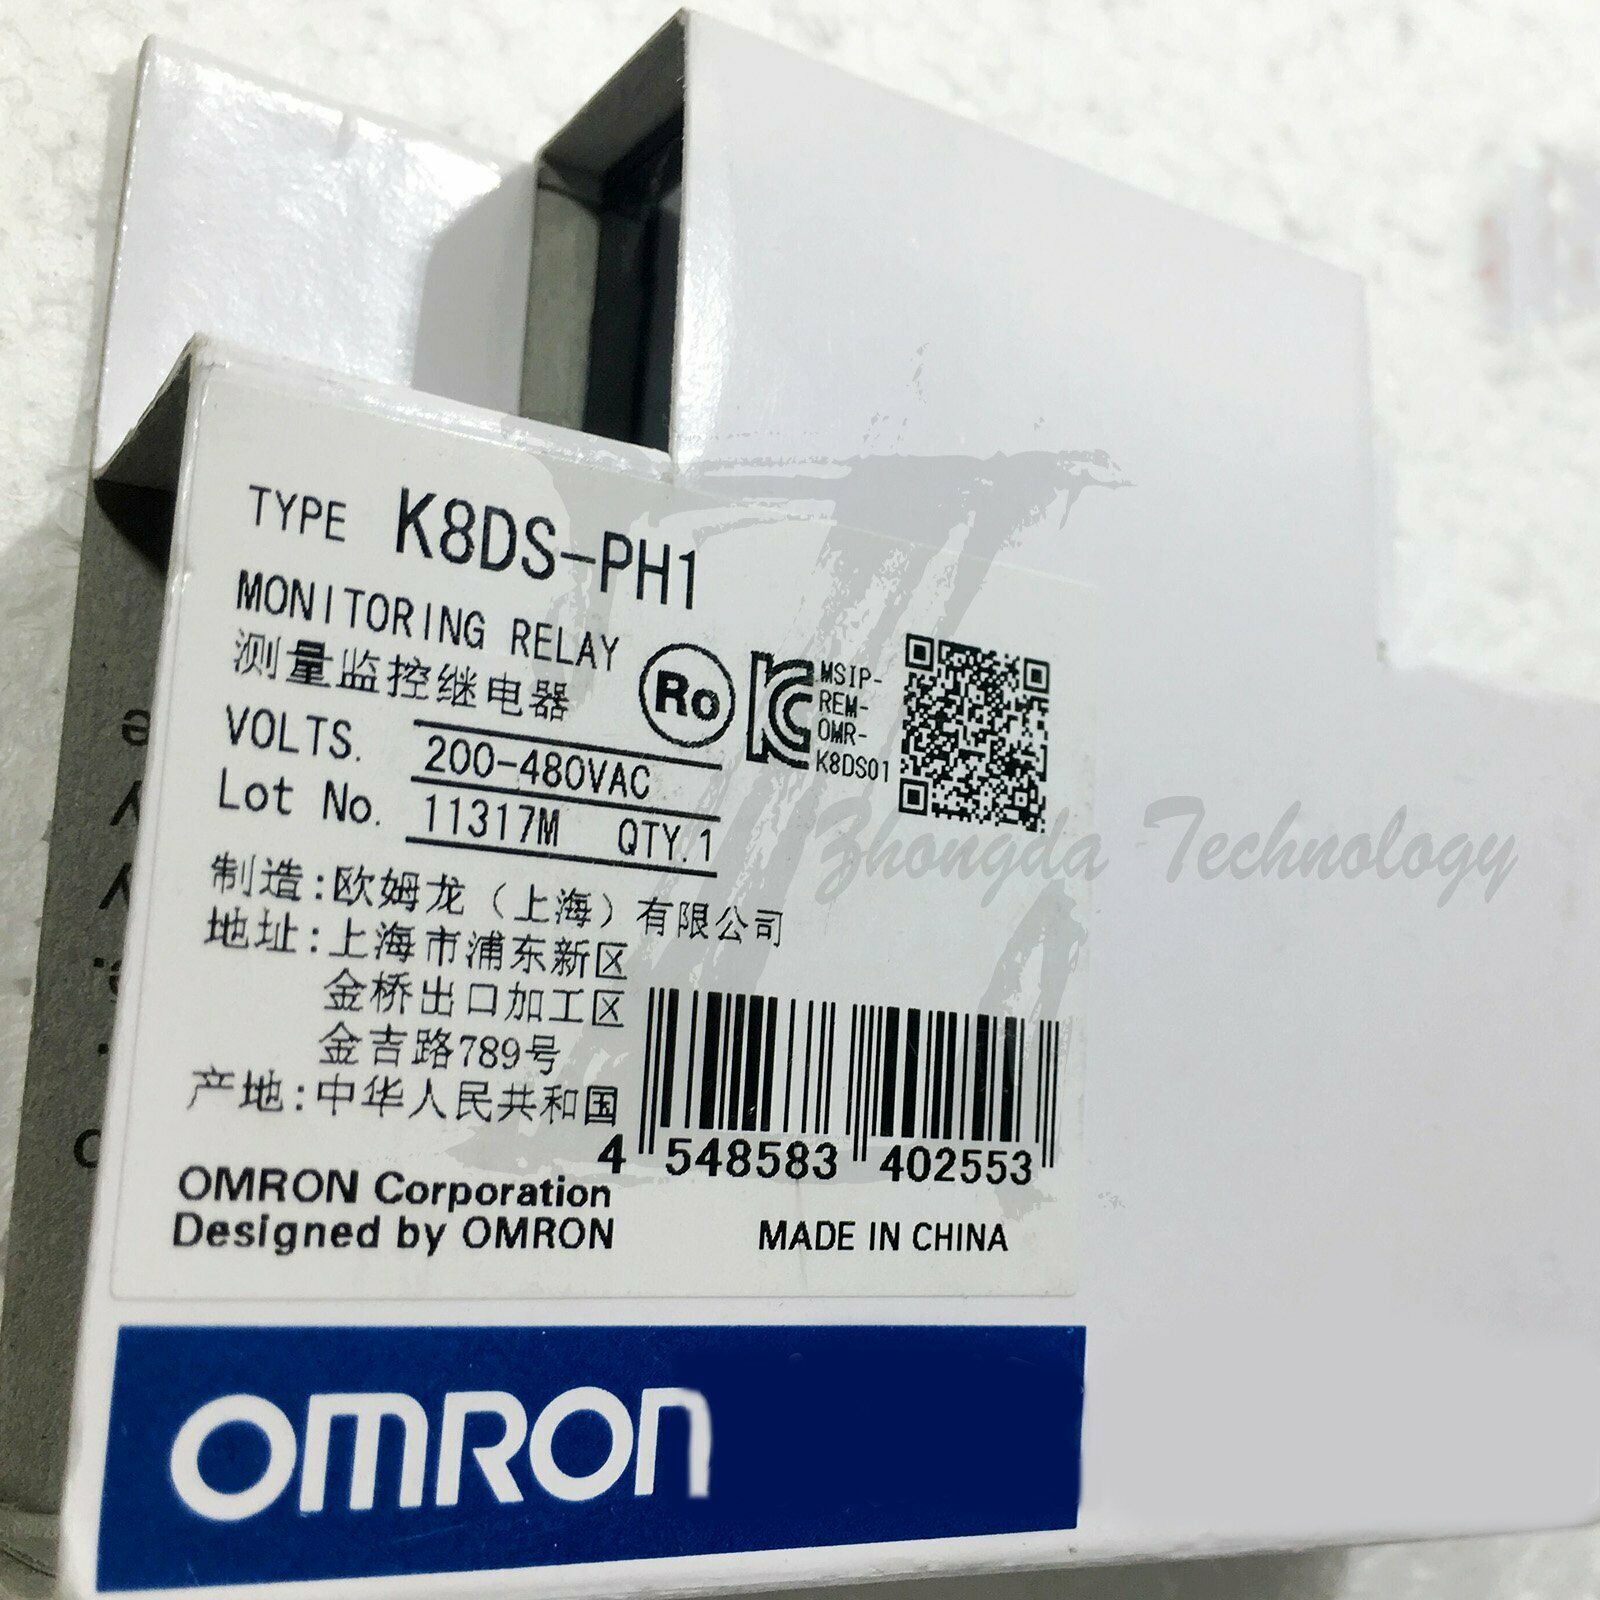 NEW Omron measurement monitoring relay K8DS-PH1